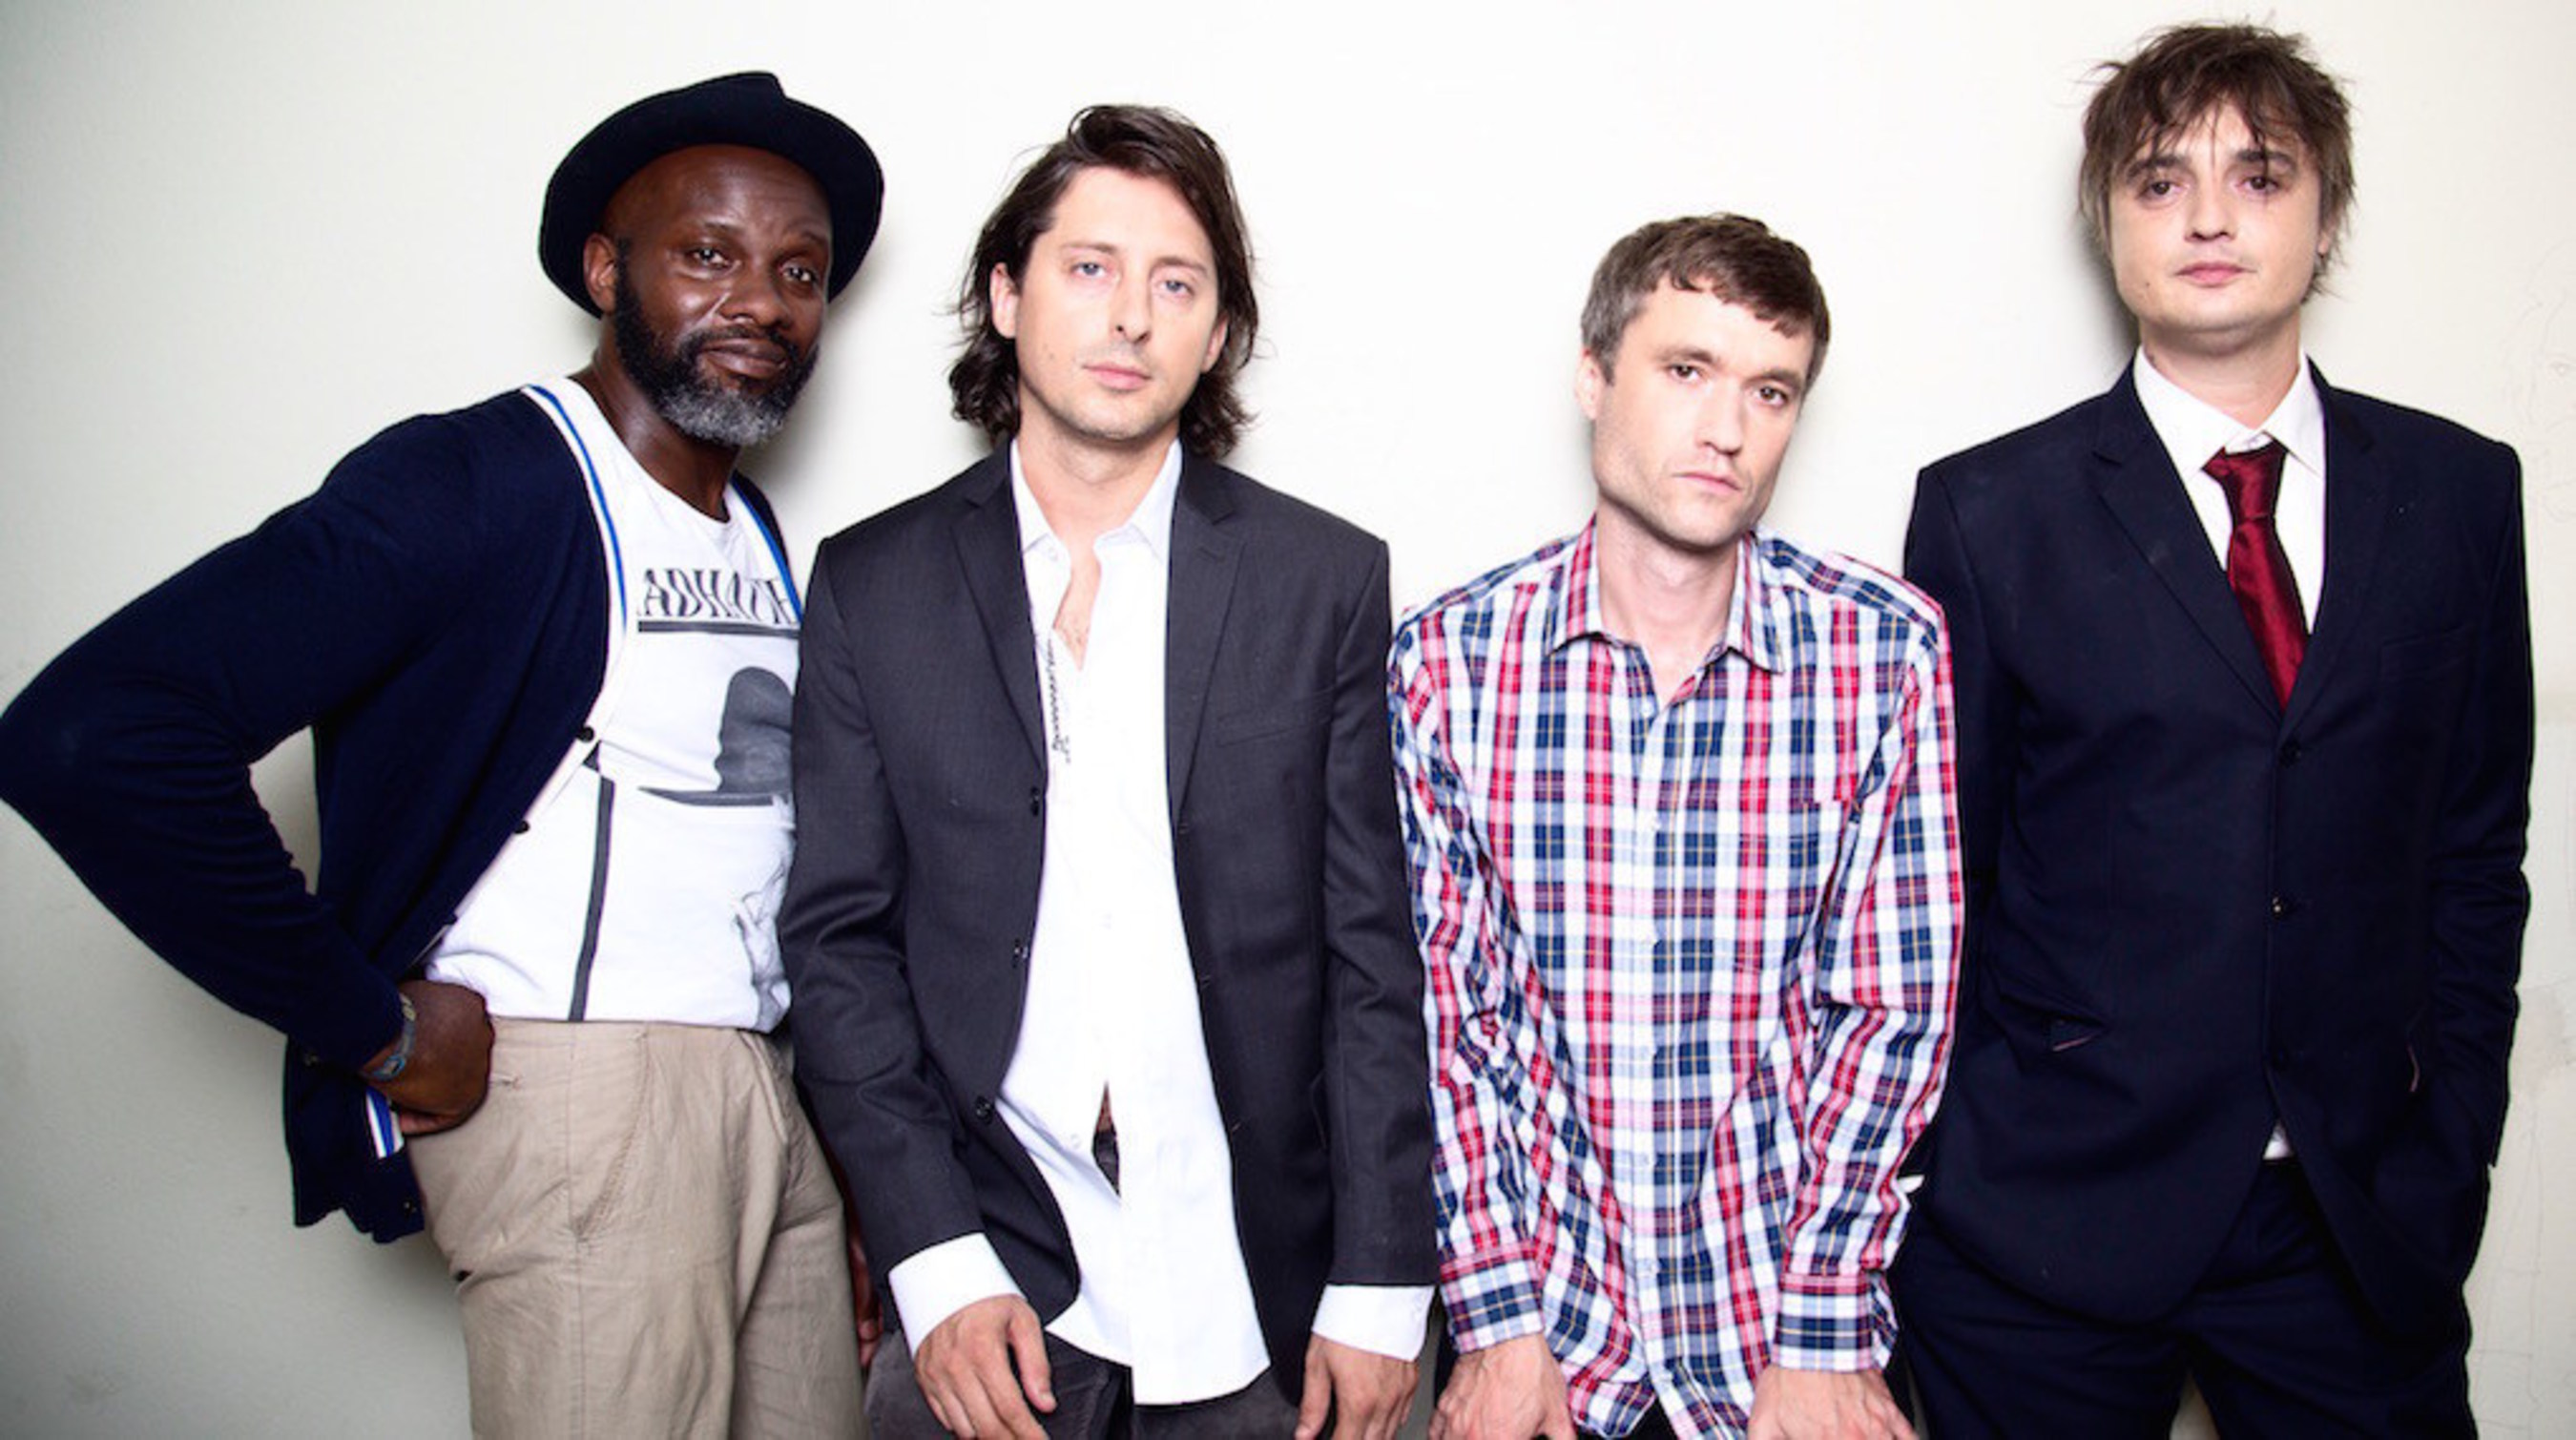 The Libertines worked with Pledge Music to make pre-orders of first album in 11 years, Anthems For Doomed Youth, available to fans